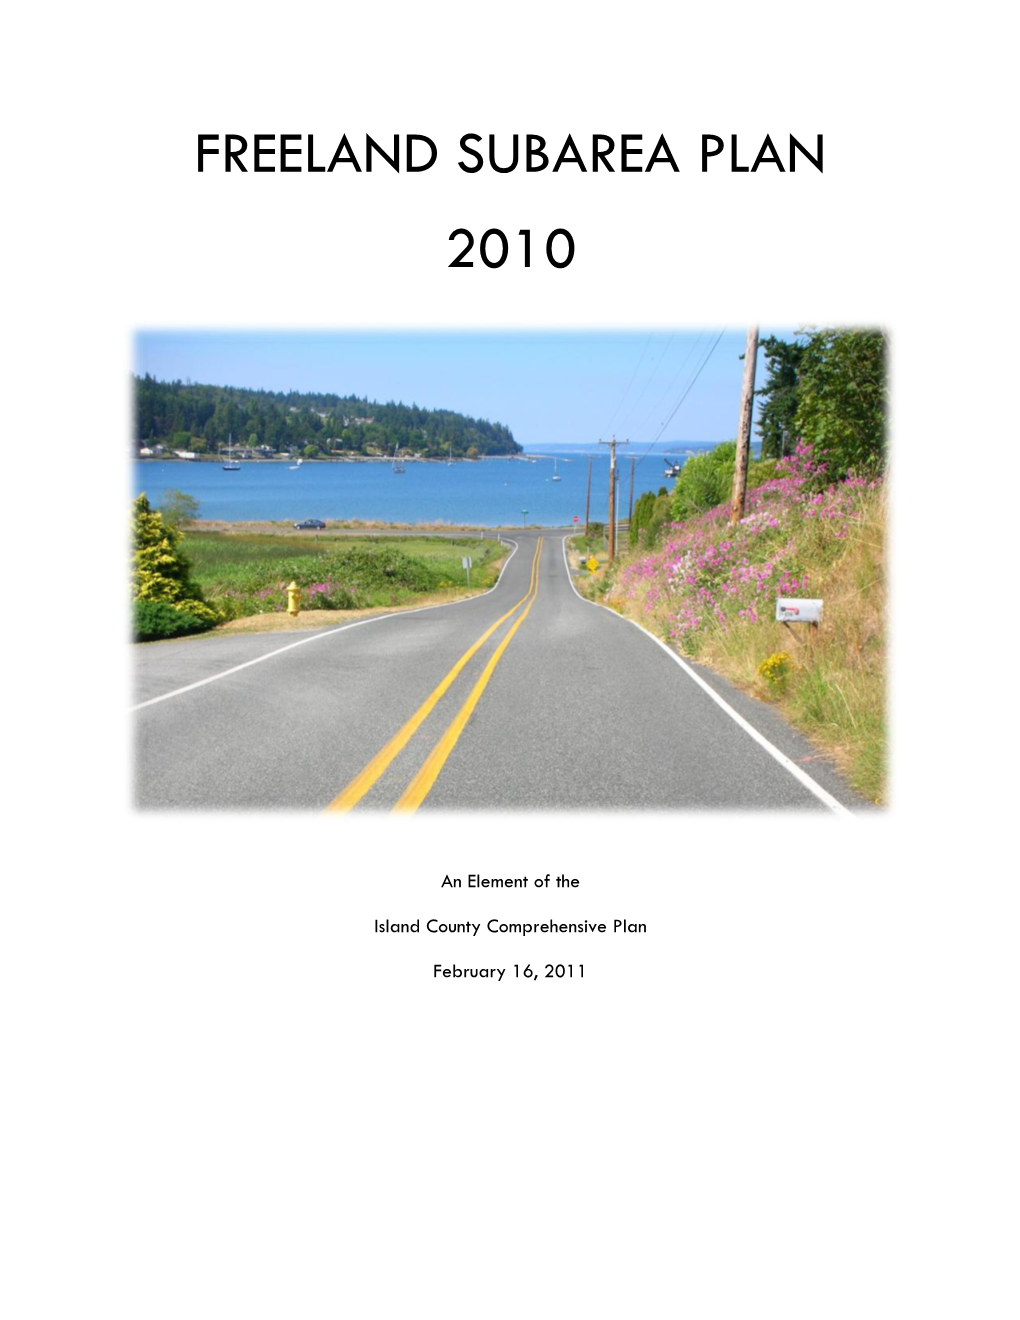 2010 Freeland Subarea Plan (FSP) Is Built Upon the 2007 Freeland Sub Area Plan (FSAP) [Sic] and Preserves the Basic Components and Intents of the 2007 FSAP